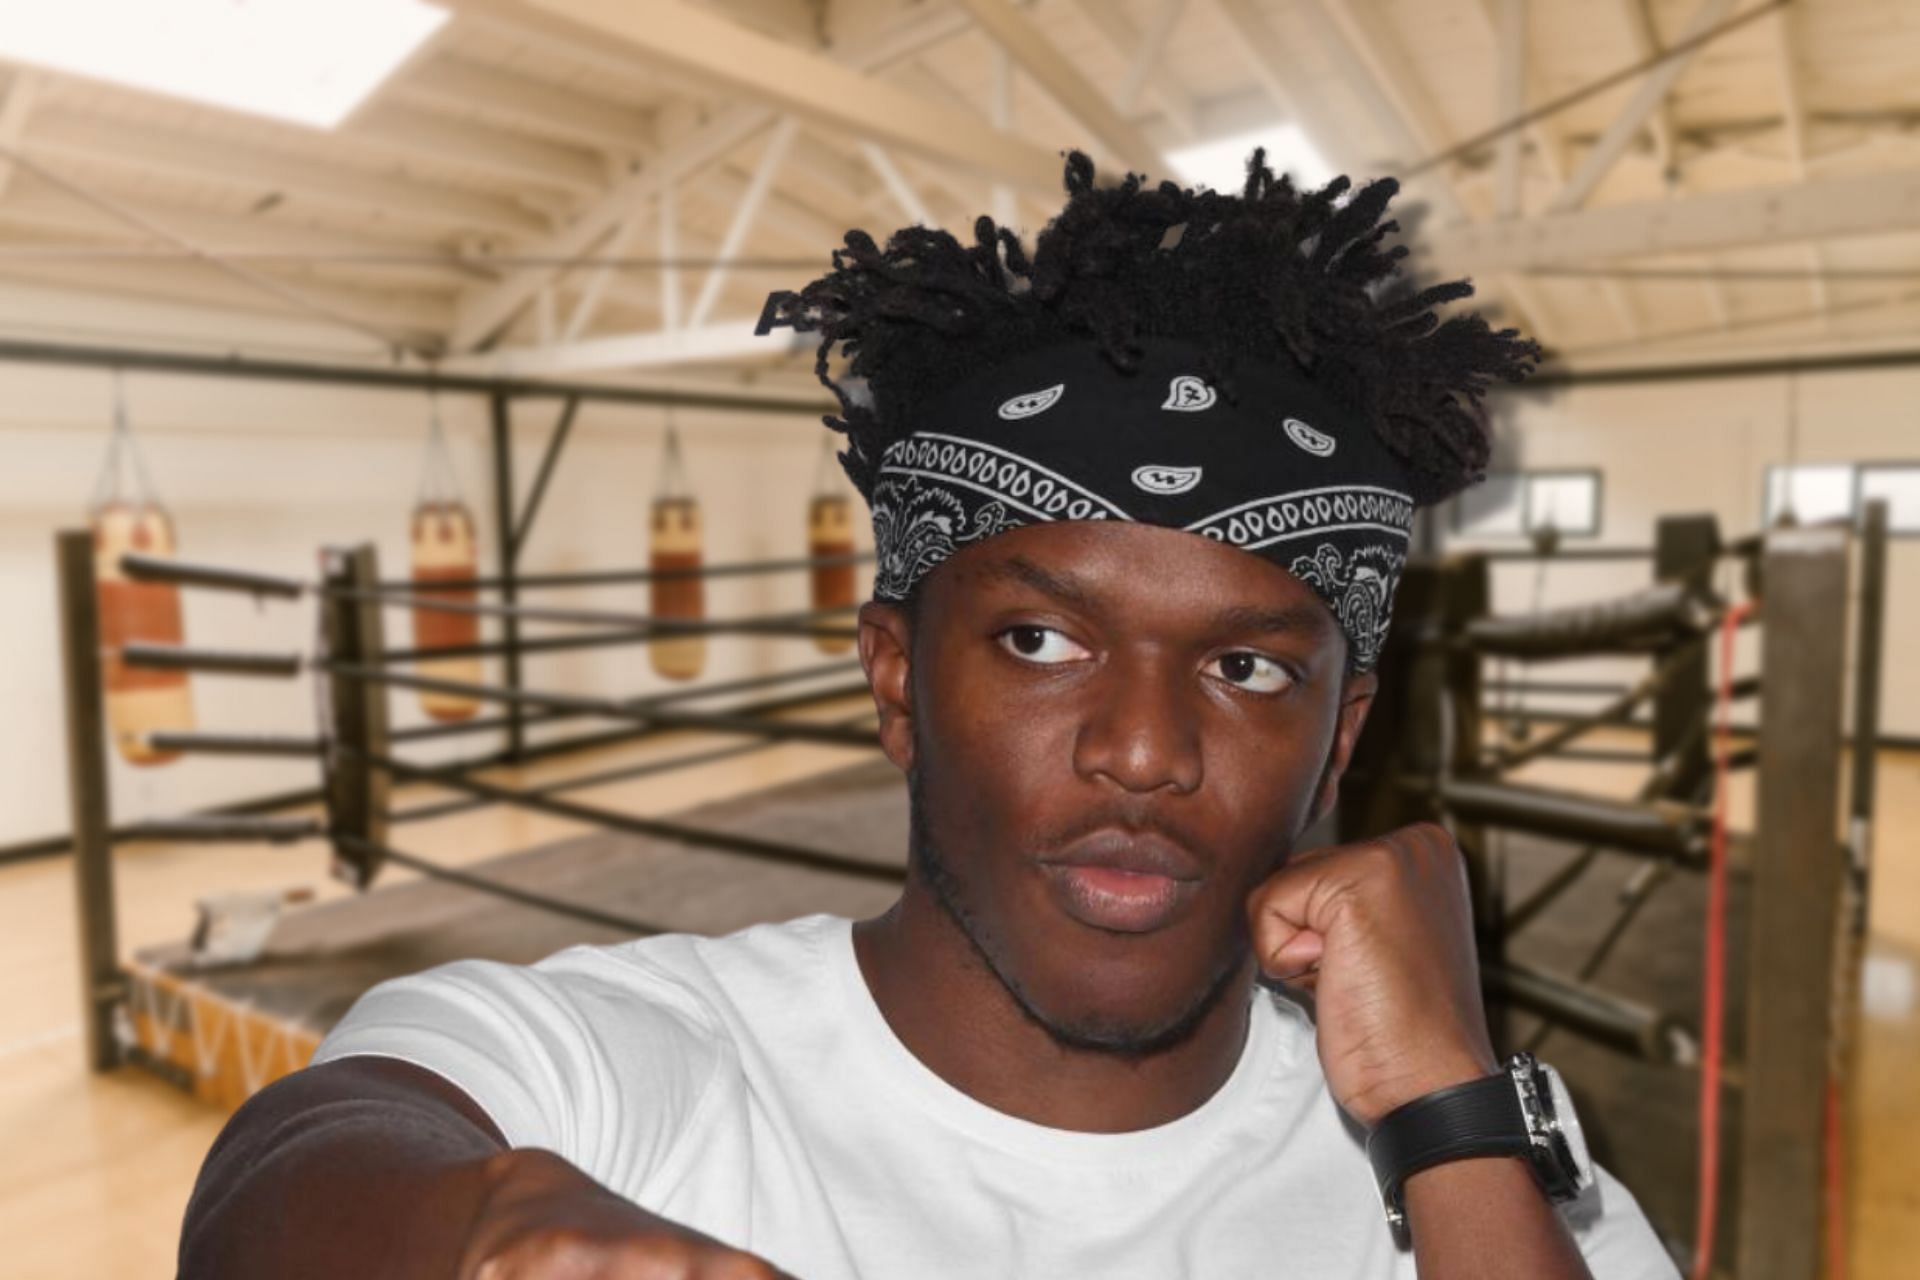 KSI announces two fights in a single event, fans go into a frenzy (Image via Sportskeeda)